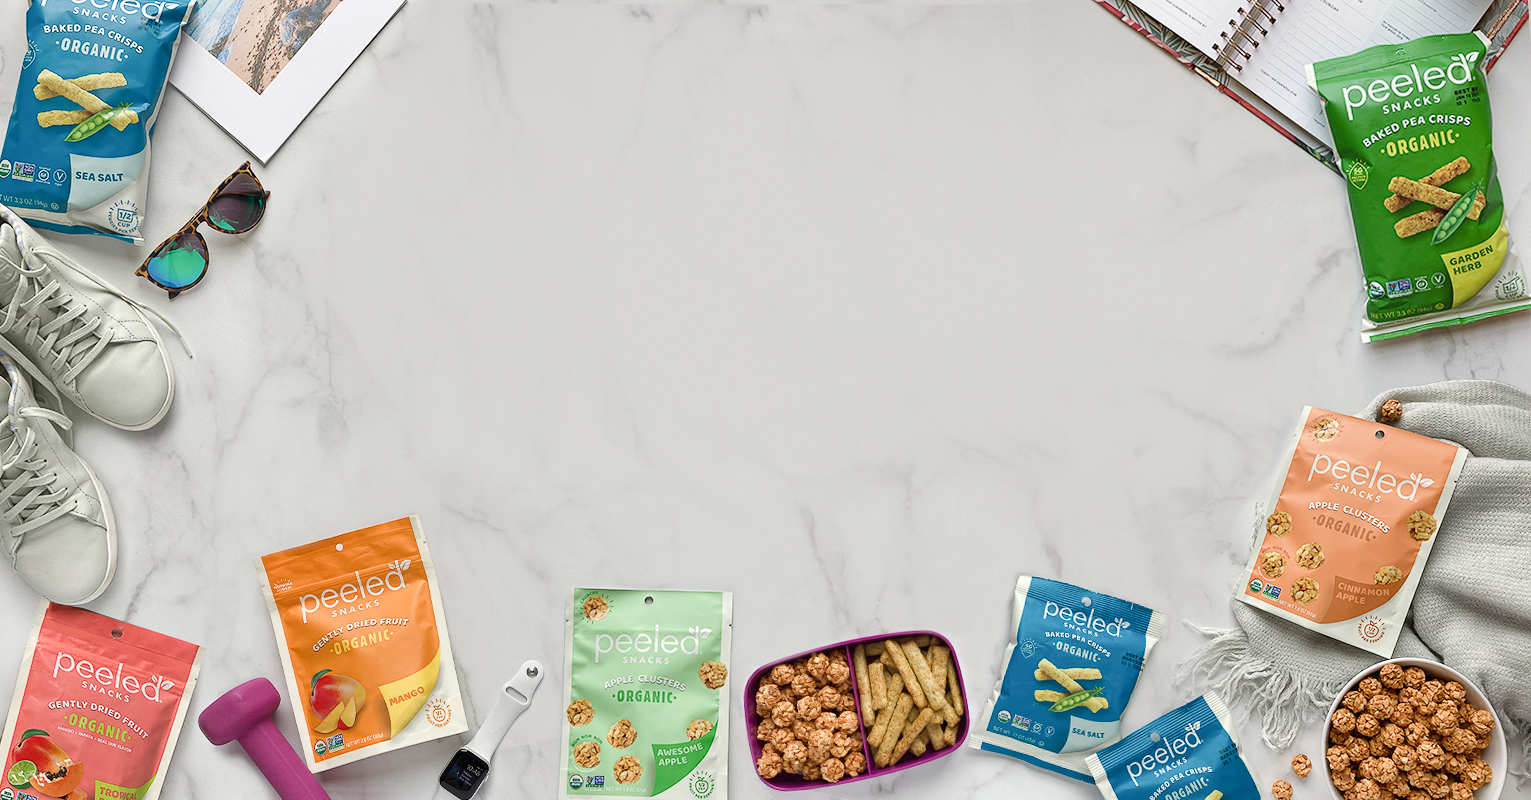 bags of peeled snacks with lifestyle objects